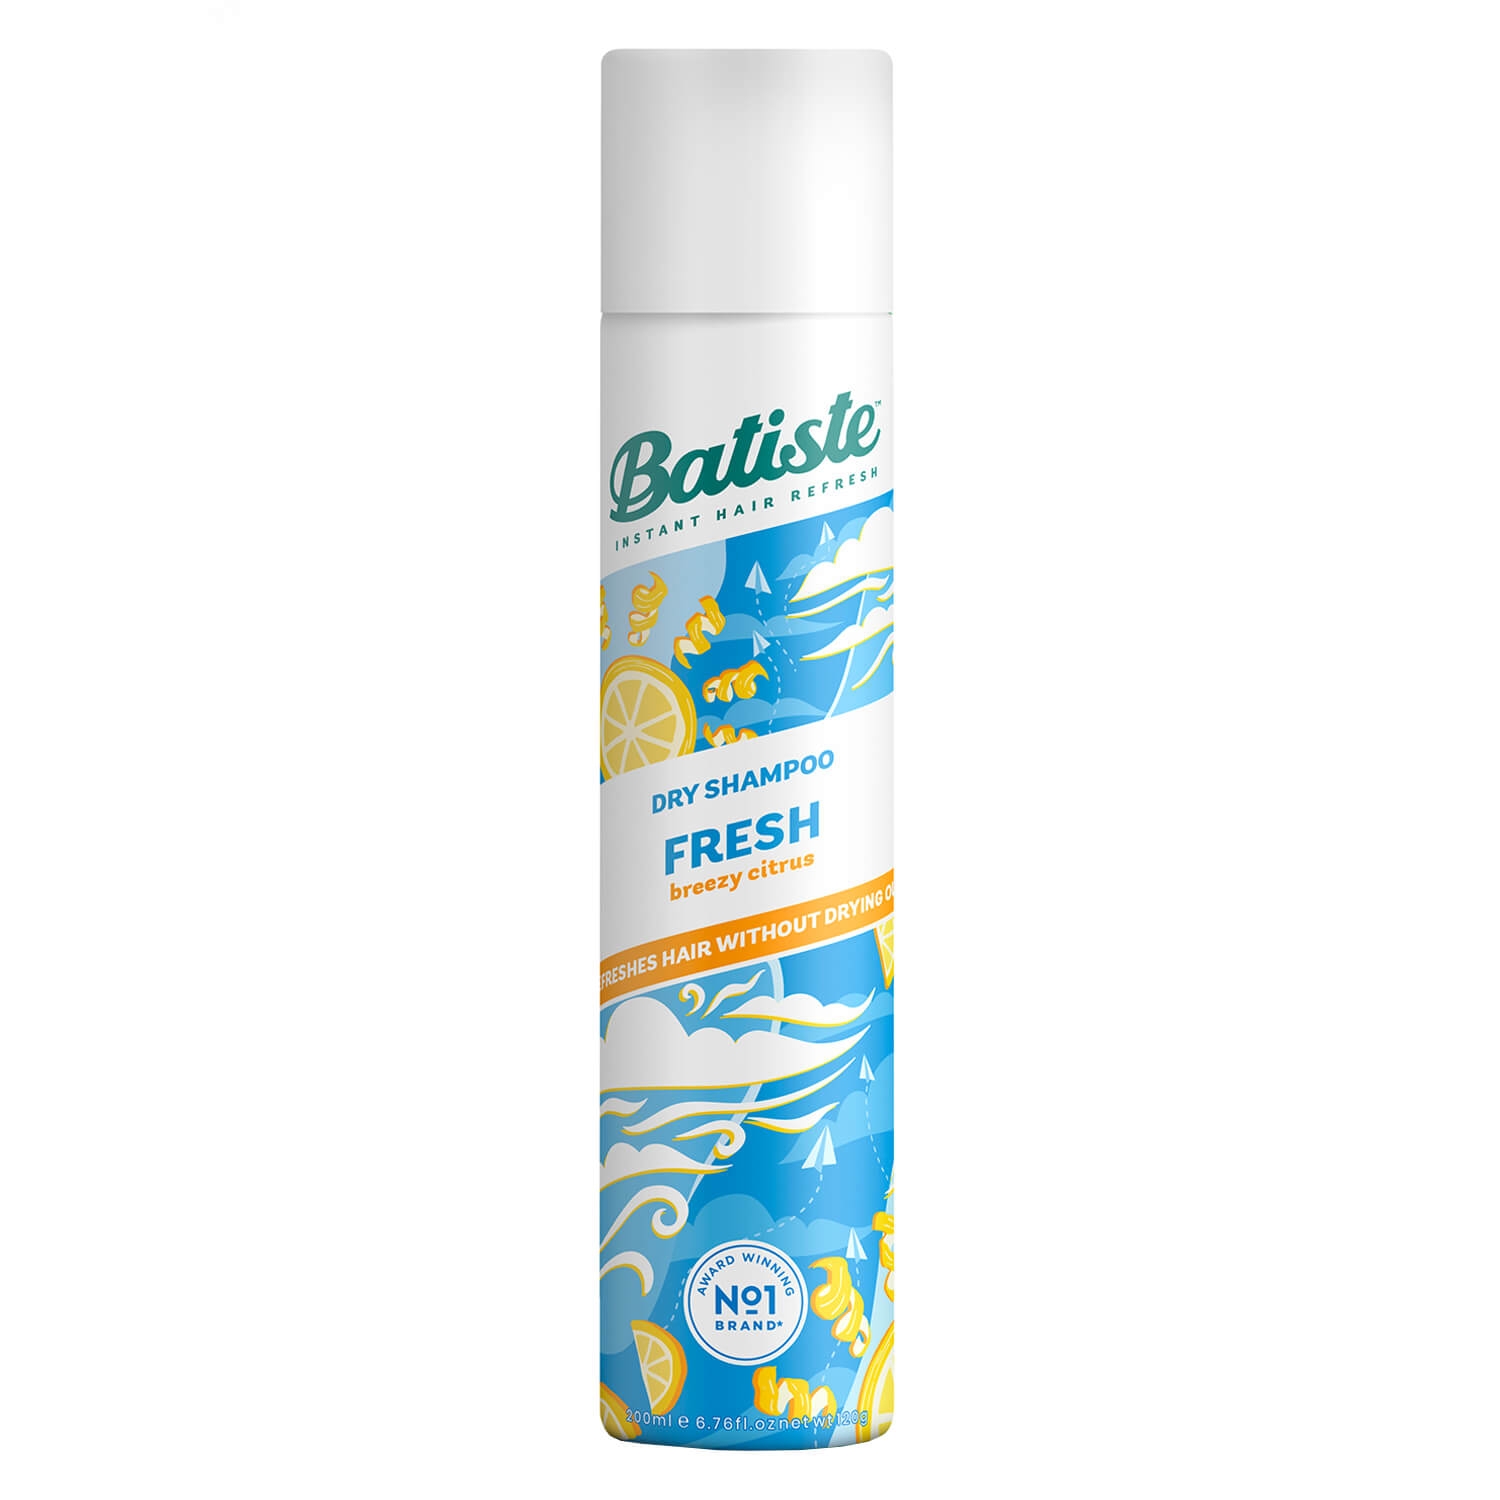 Product image from Batiste - Fresh